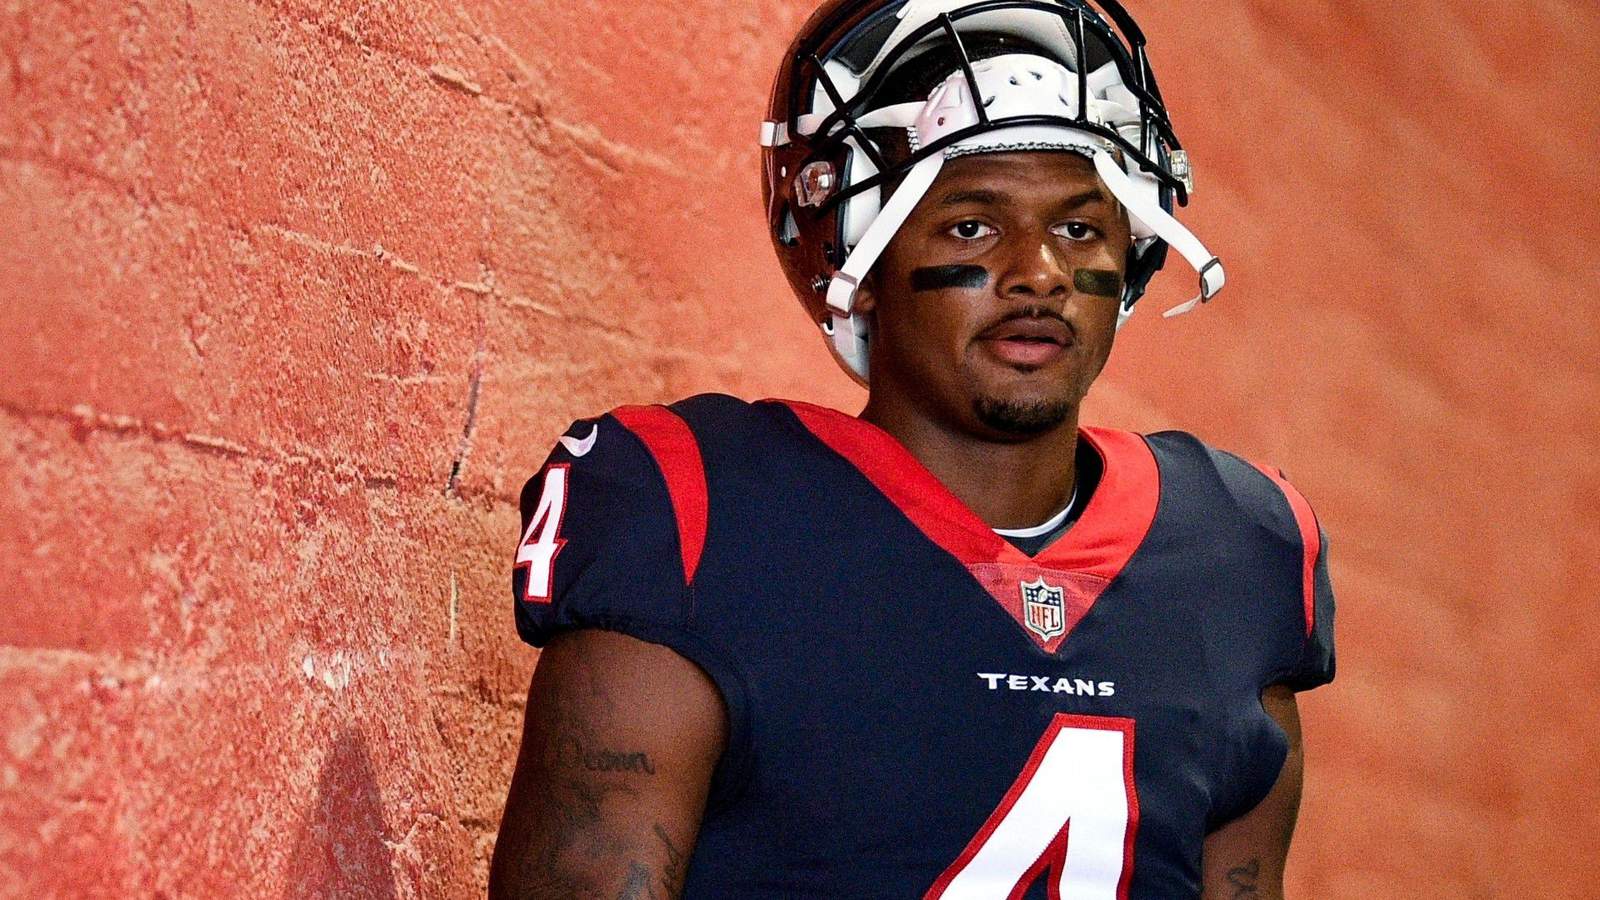 2 of Houston’s most prominent attorneys go toe-to-toe in statements about Deshaun Watson case